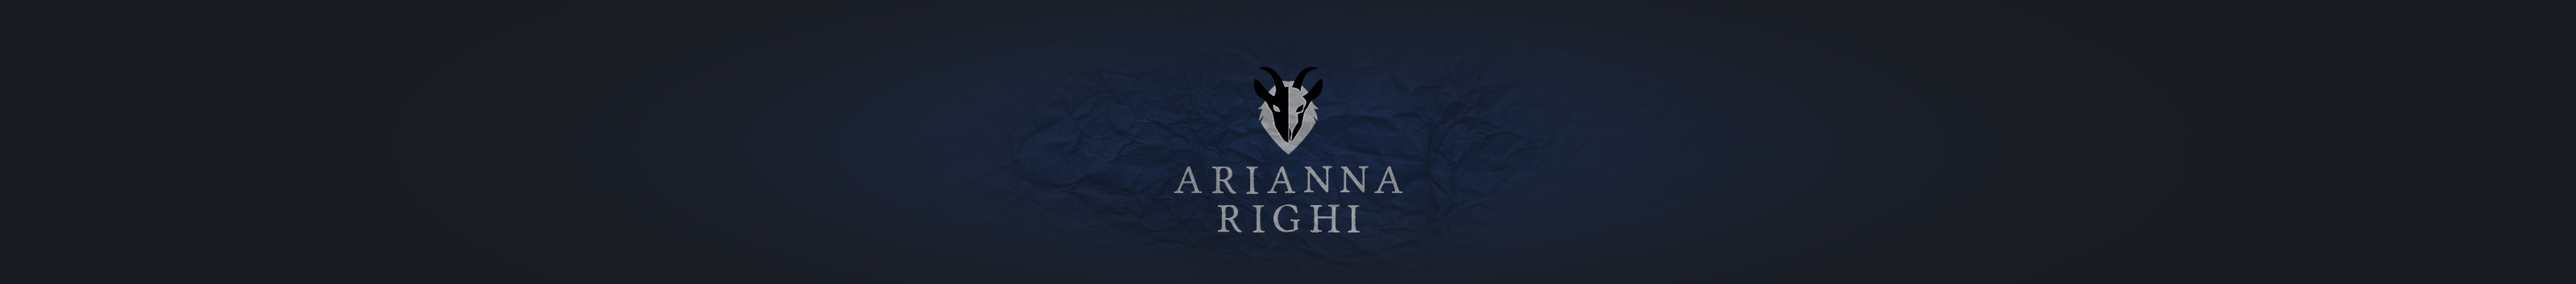 Arianna Righis profilbanner